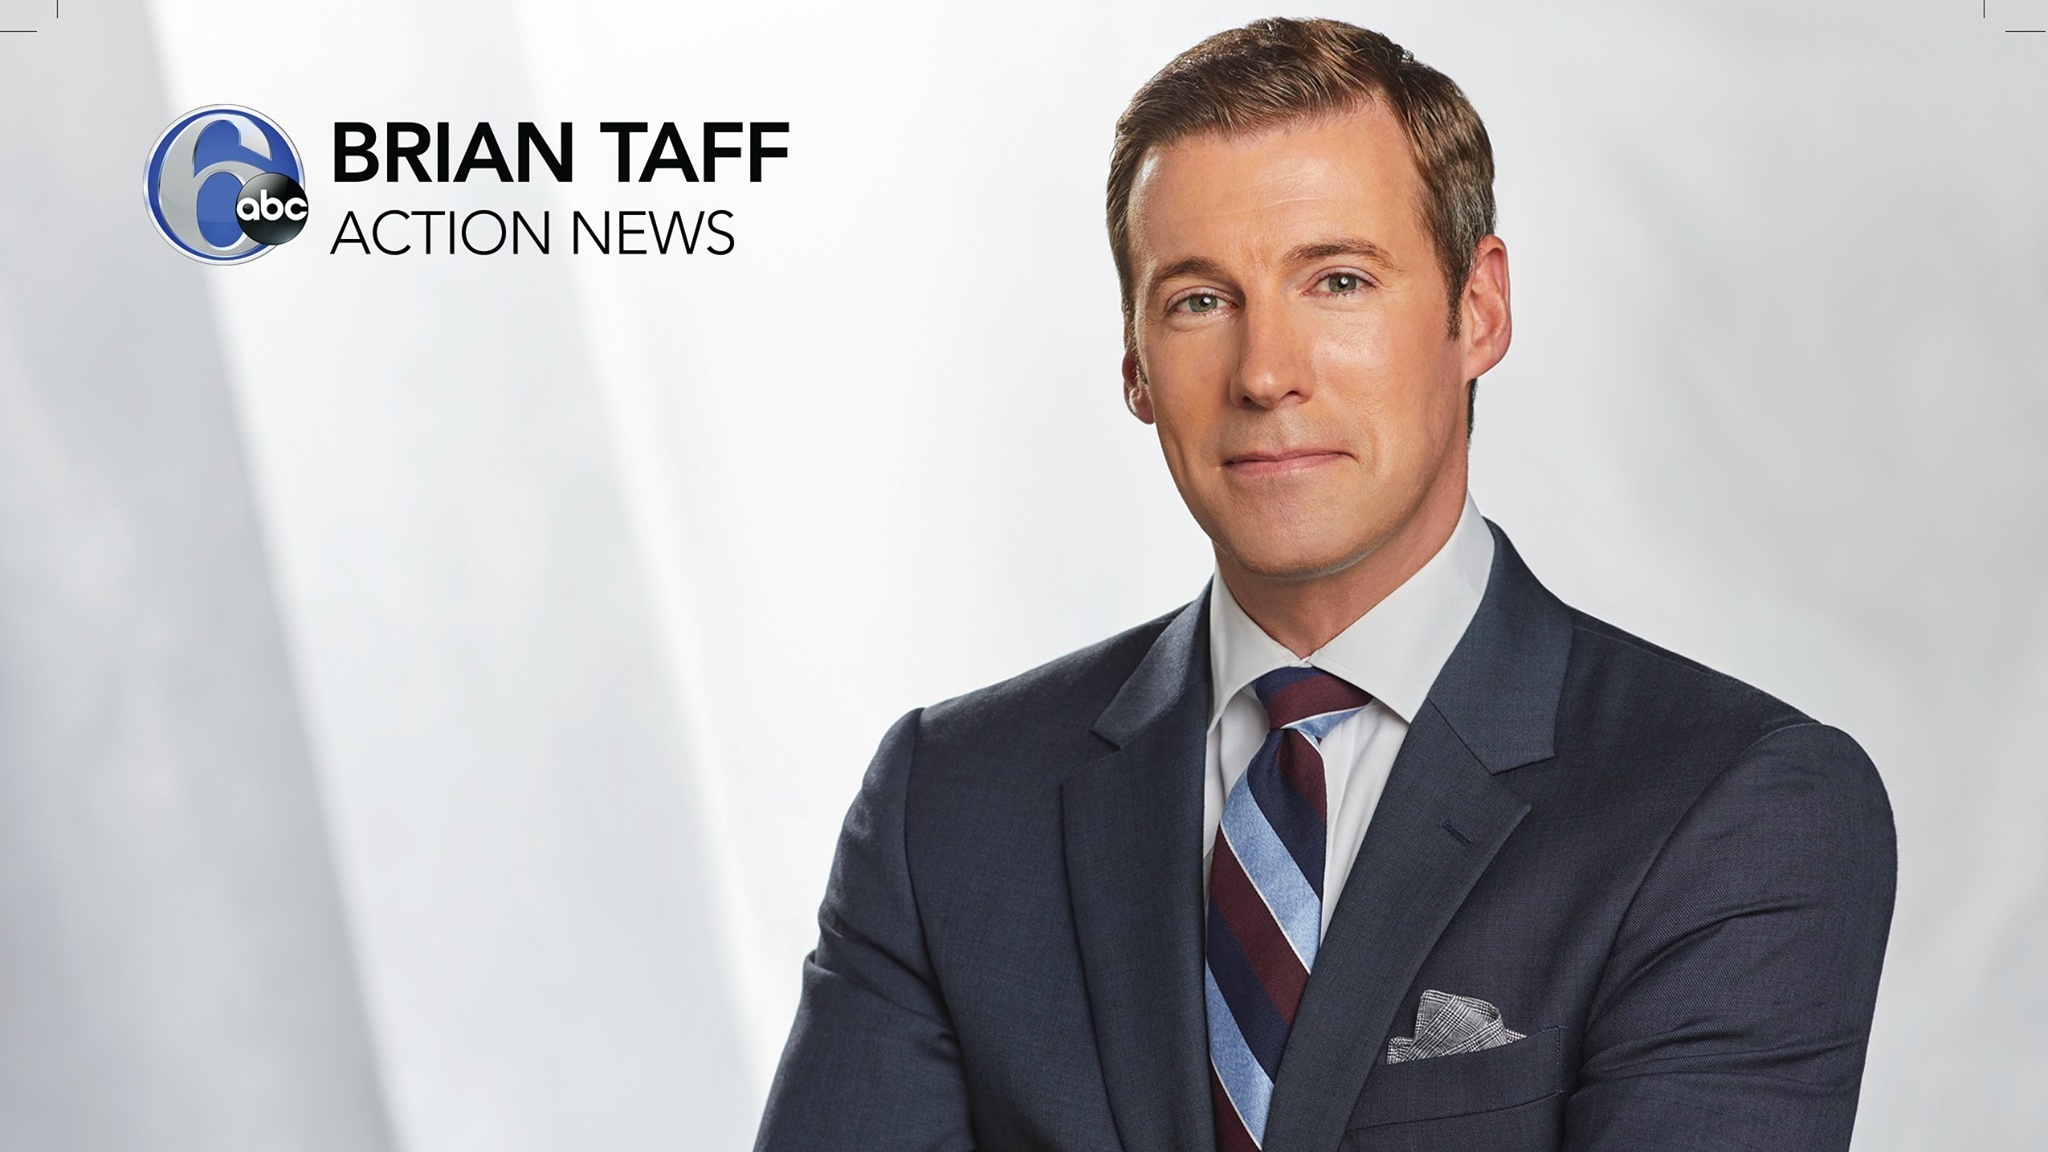 Brian Taff, the new anchor for 6ABC's Action News broadcast. Photo Credit: 6ABC.